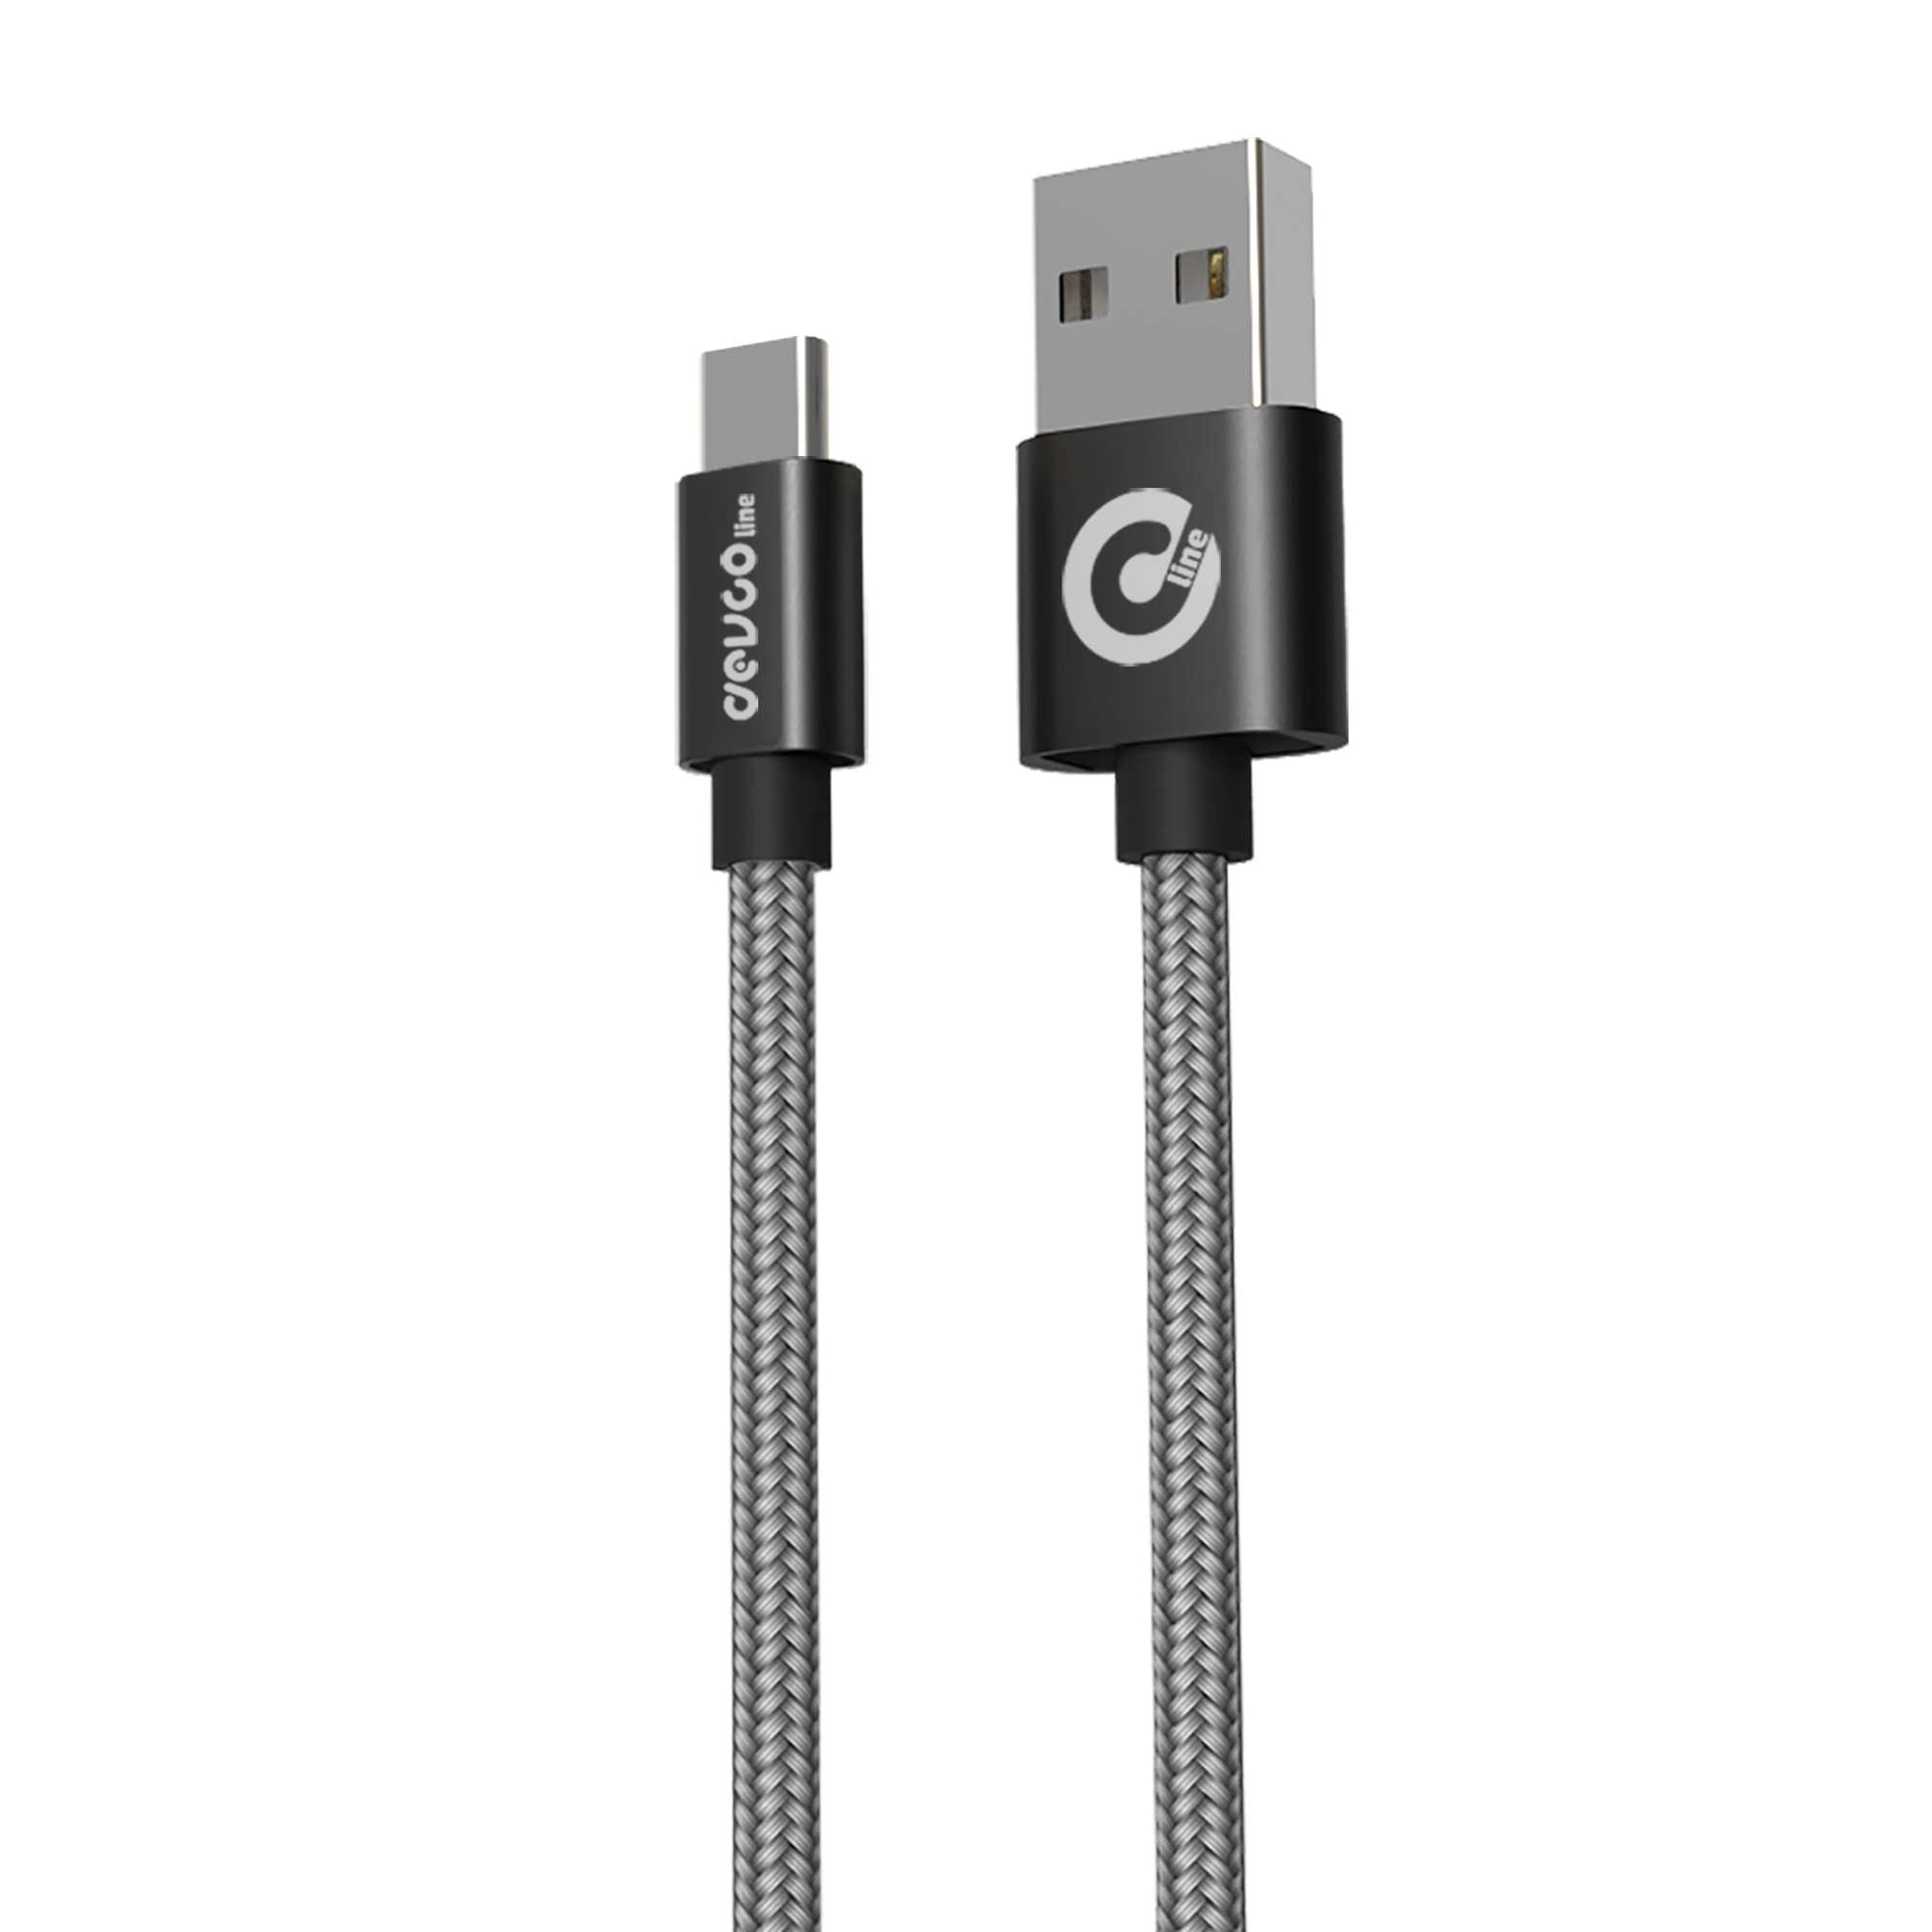 USB smartphone cable fast charging USB-A USB-C connection - AT CR TPC2